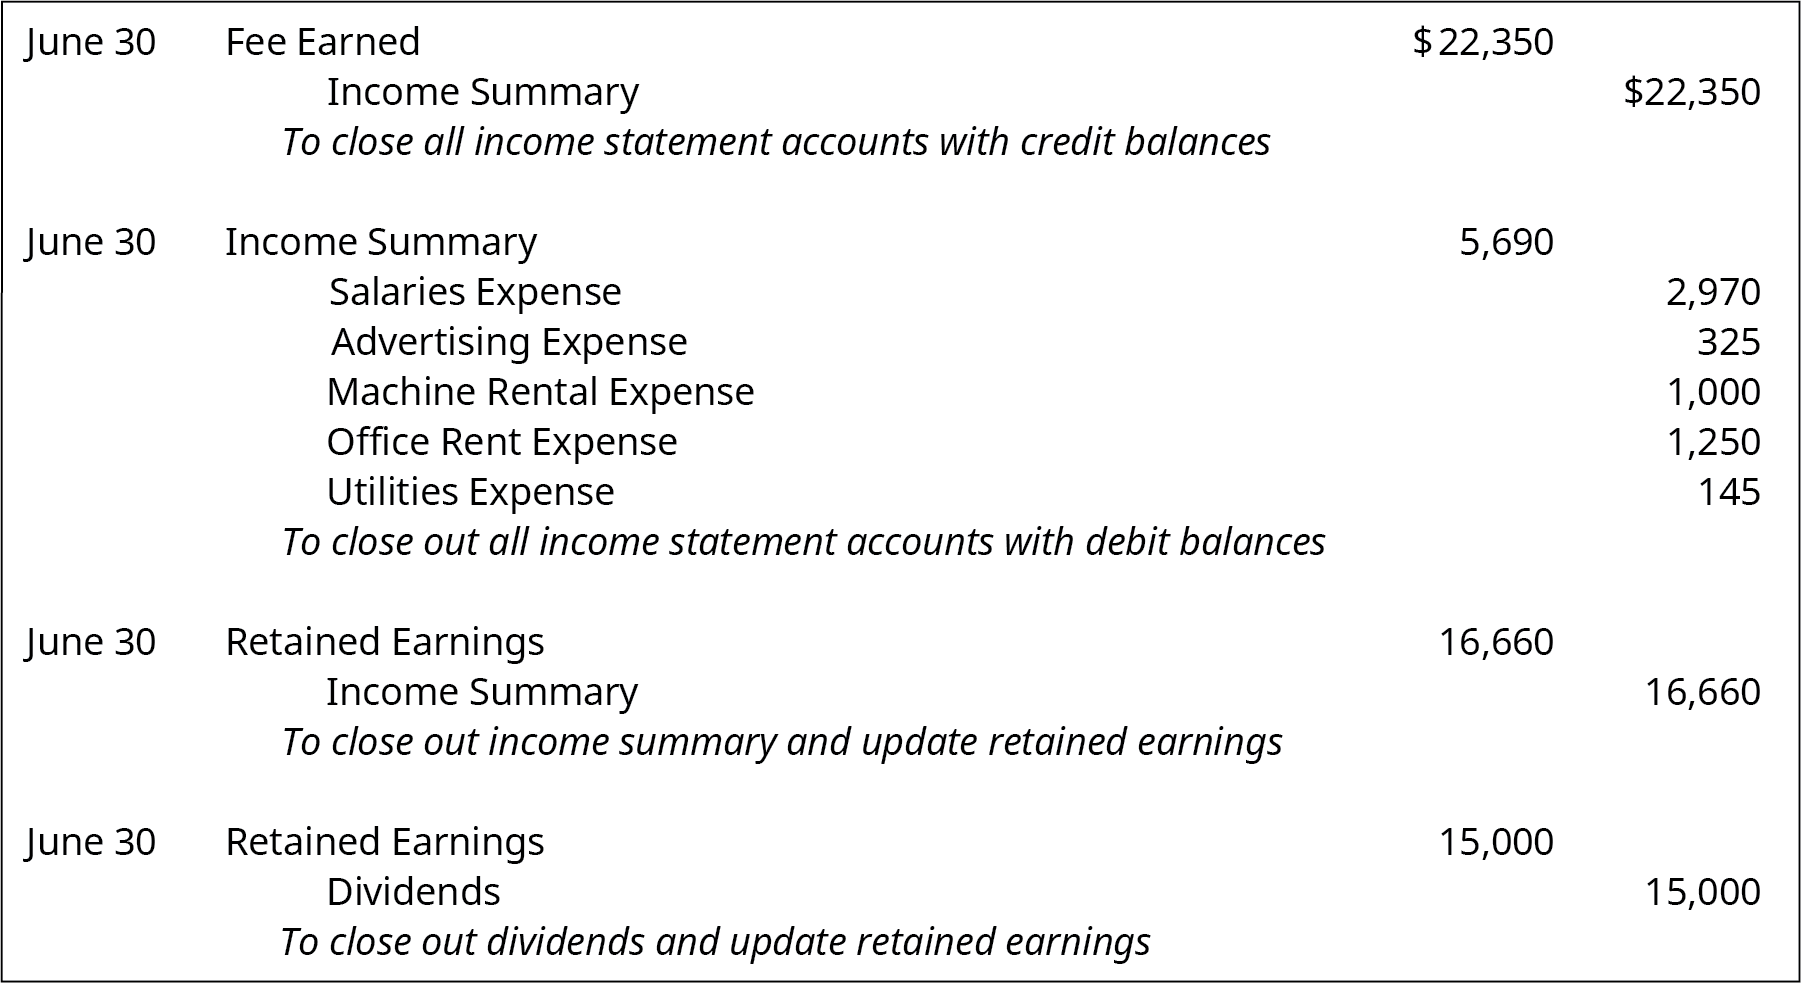 June 30 debit Fee earned 22,350, credit Income Summary 22,350. Explanation: “To close all income statement accounts with credit balances.” June 30 debit Income Summary 5,690, credit Salaries Expense 2,970, Advertising Expense 325, Machine Rental Expense 1,000, Office Rent Expense 1,250, and Utilities expense 145. Explanation: “To close out all income statement accounts with debit balances.” June 30 debit Retained Earnings 16,660, Credit Income Summary 16,660. Explanation: “To close out income summary and update retained earnings.” June 30 debit Retained Earnings 15,000 and credit Dividends 15,000. Explanation: “To close out dividends and update retained earnings.”